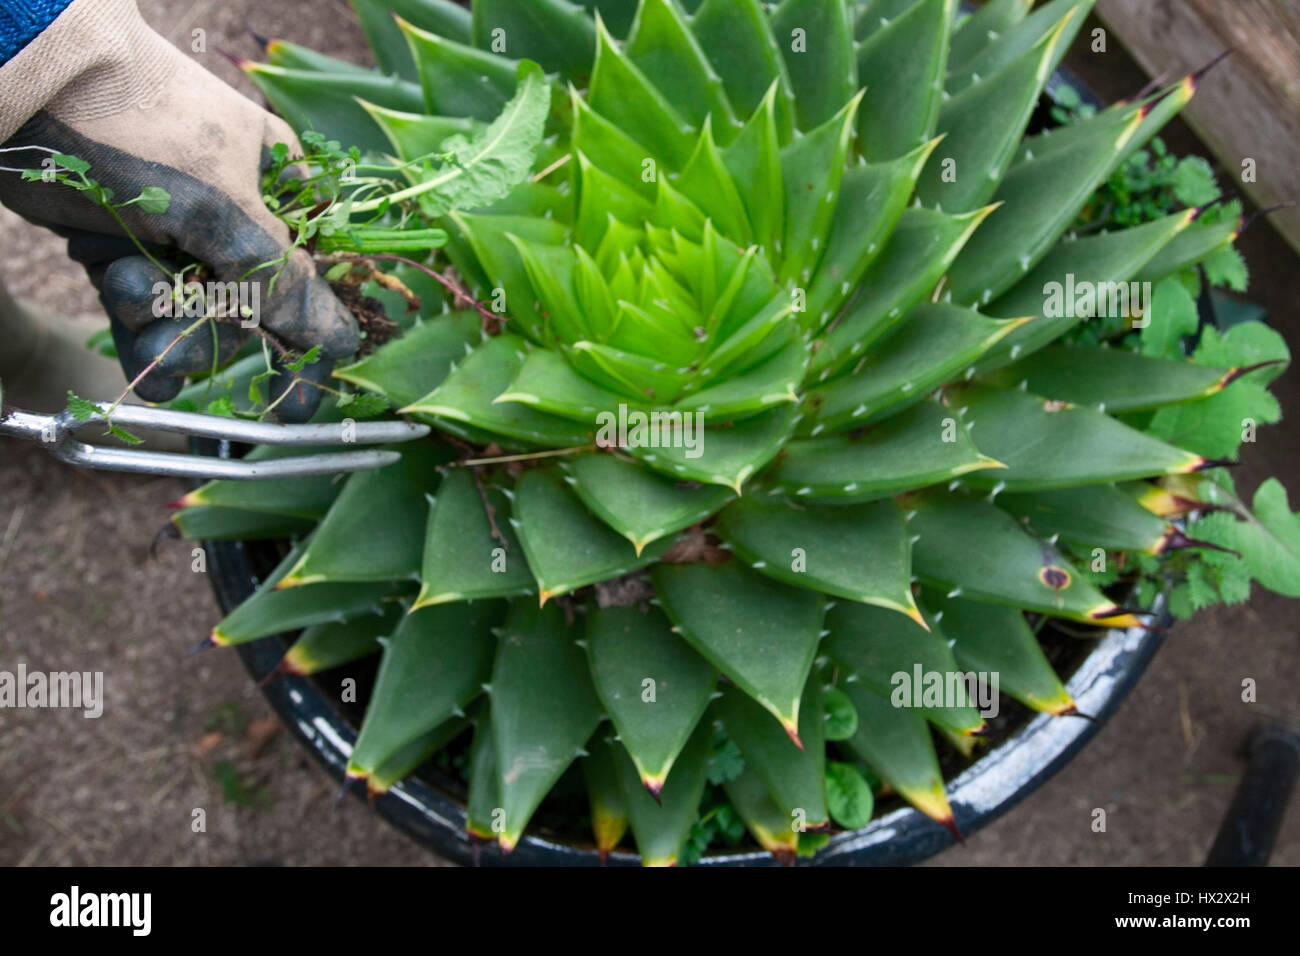 Weeding a pot planted with Aloe polyphylla using a two-pronged metal weeder Stock Photo